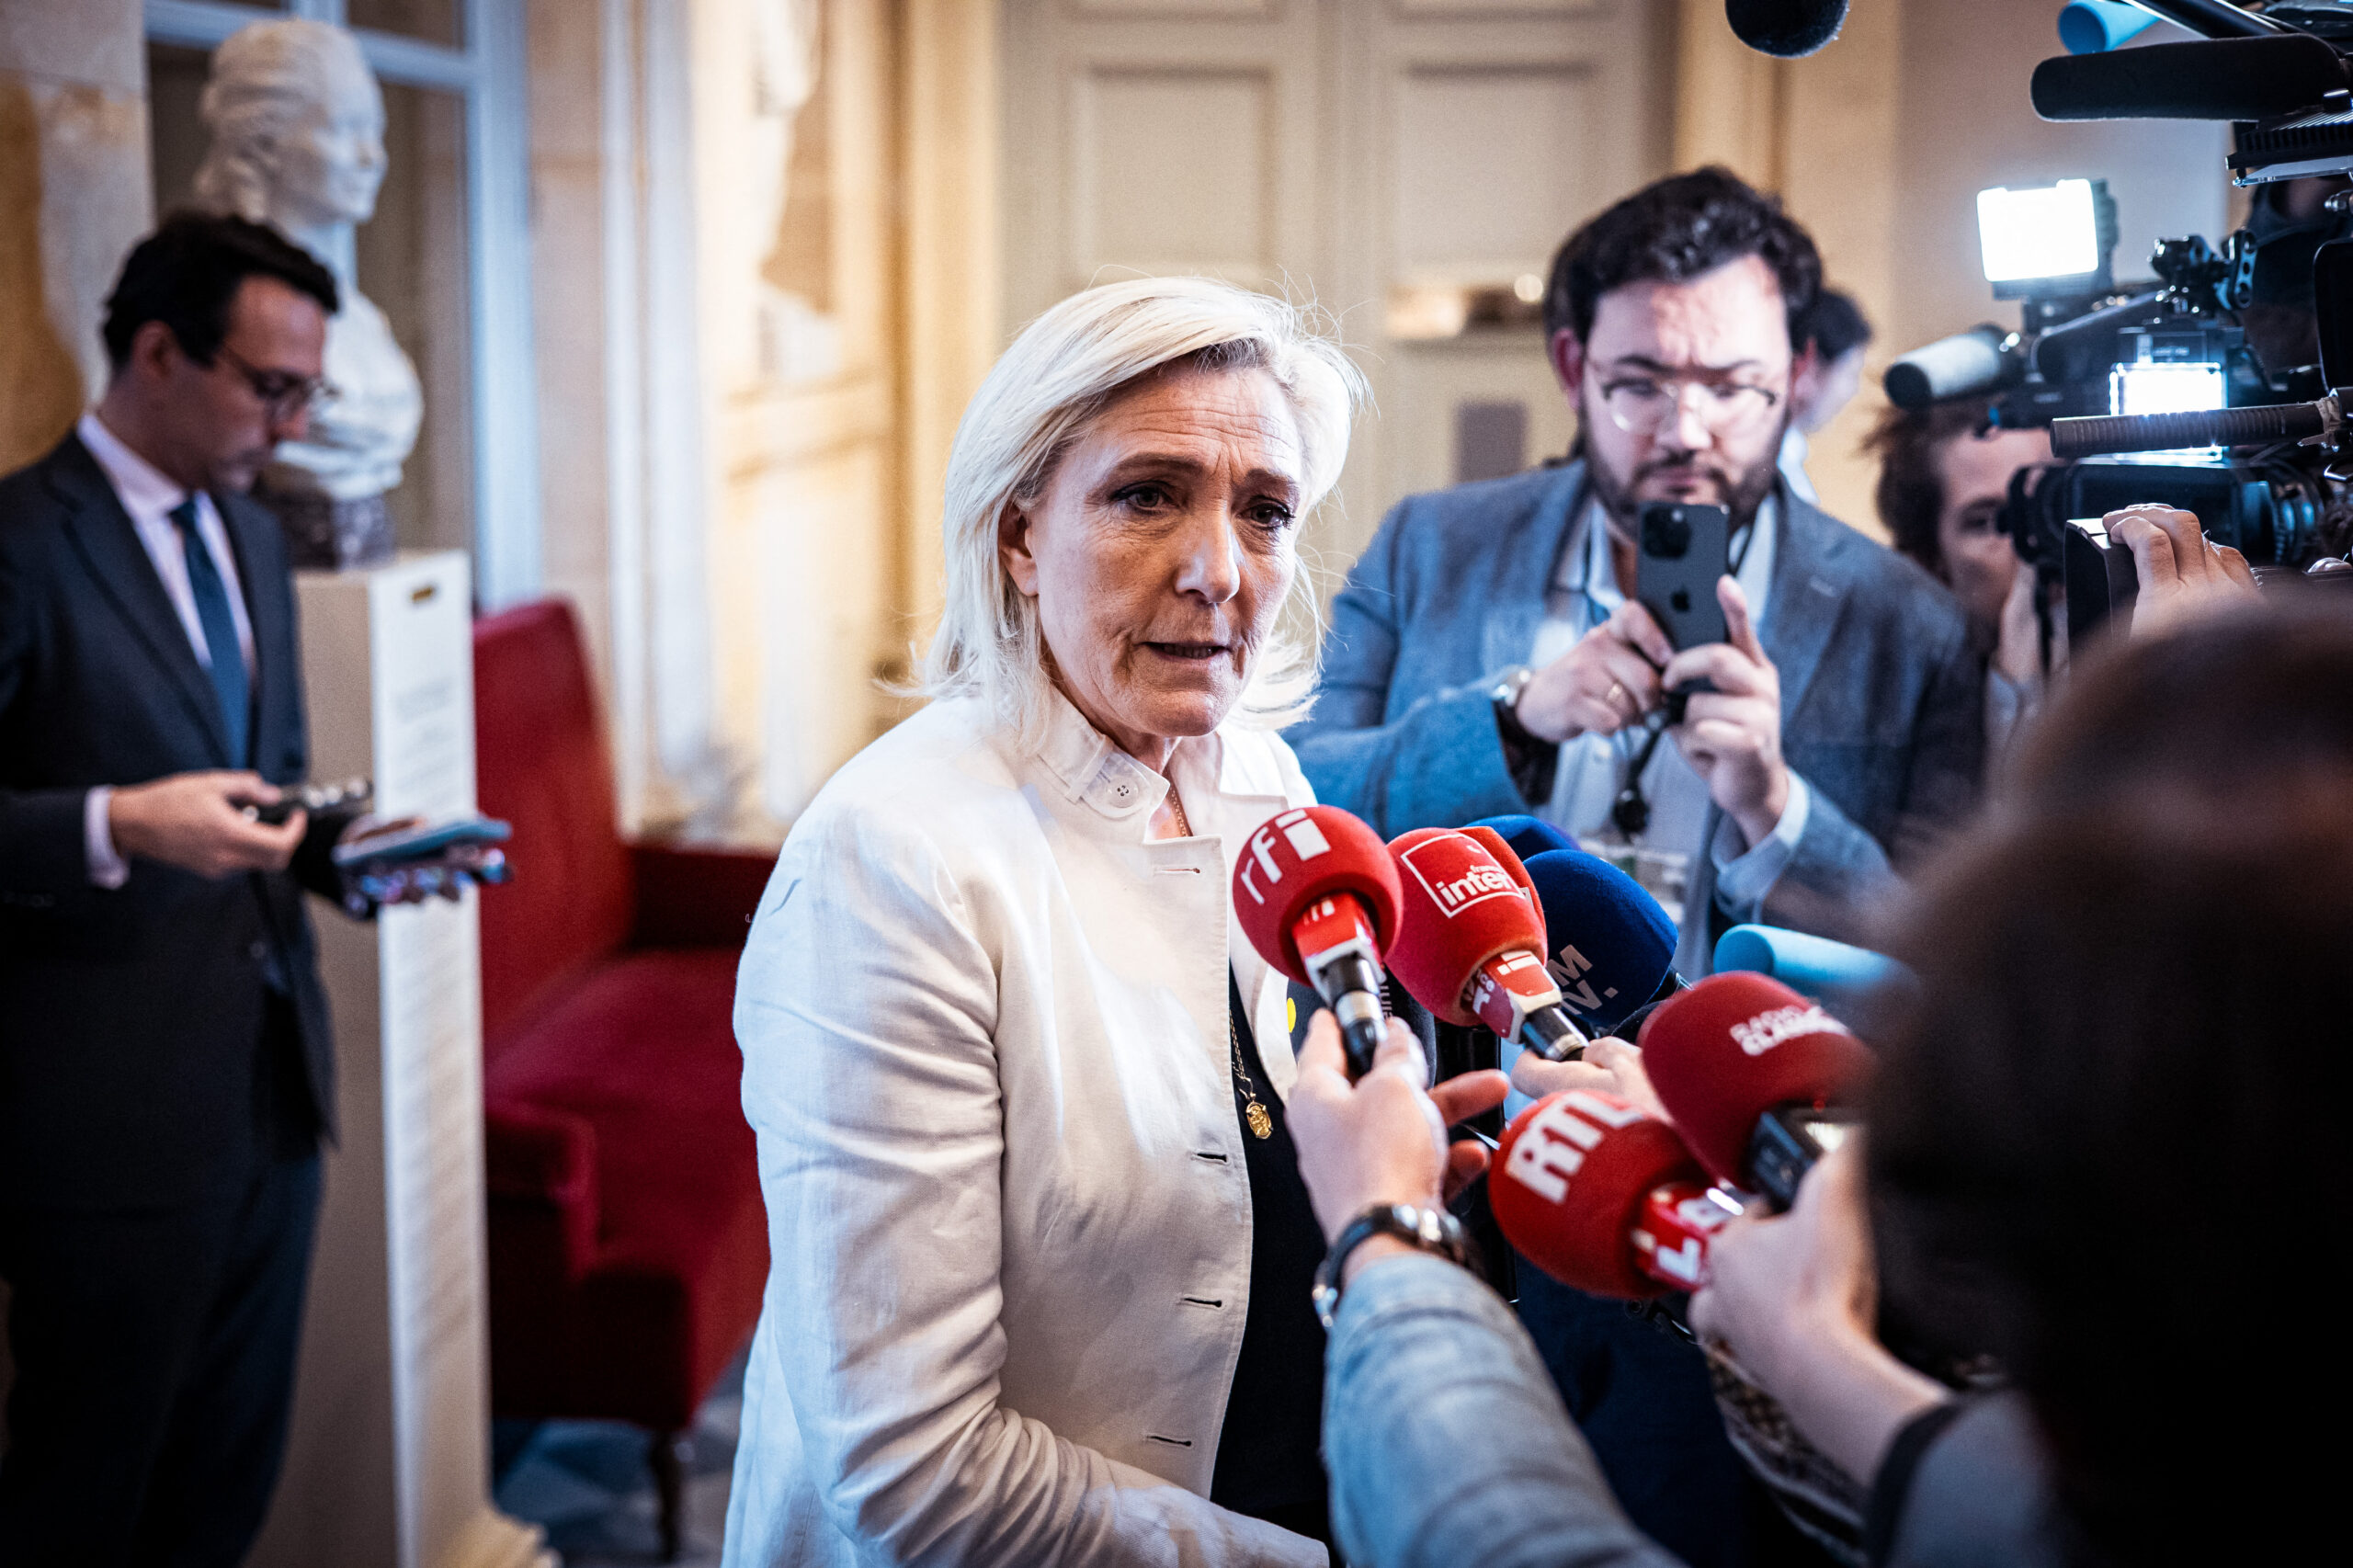 Media Organizations Alarmed as Right-Wing Parties Gain Ground in European Elections